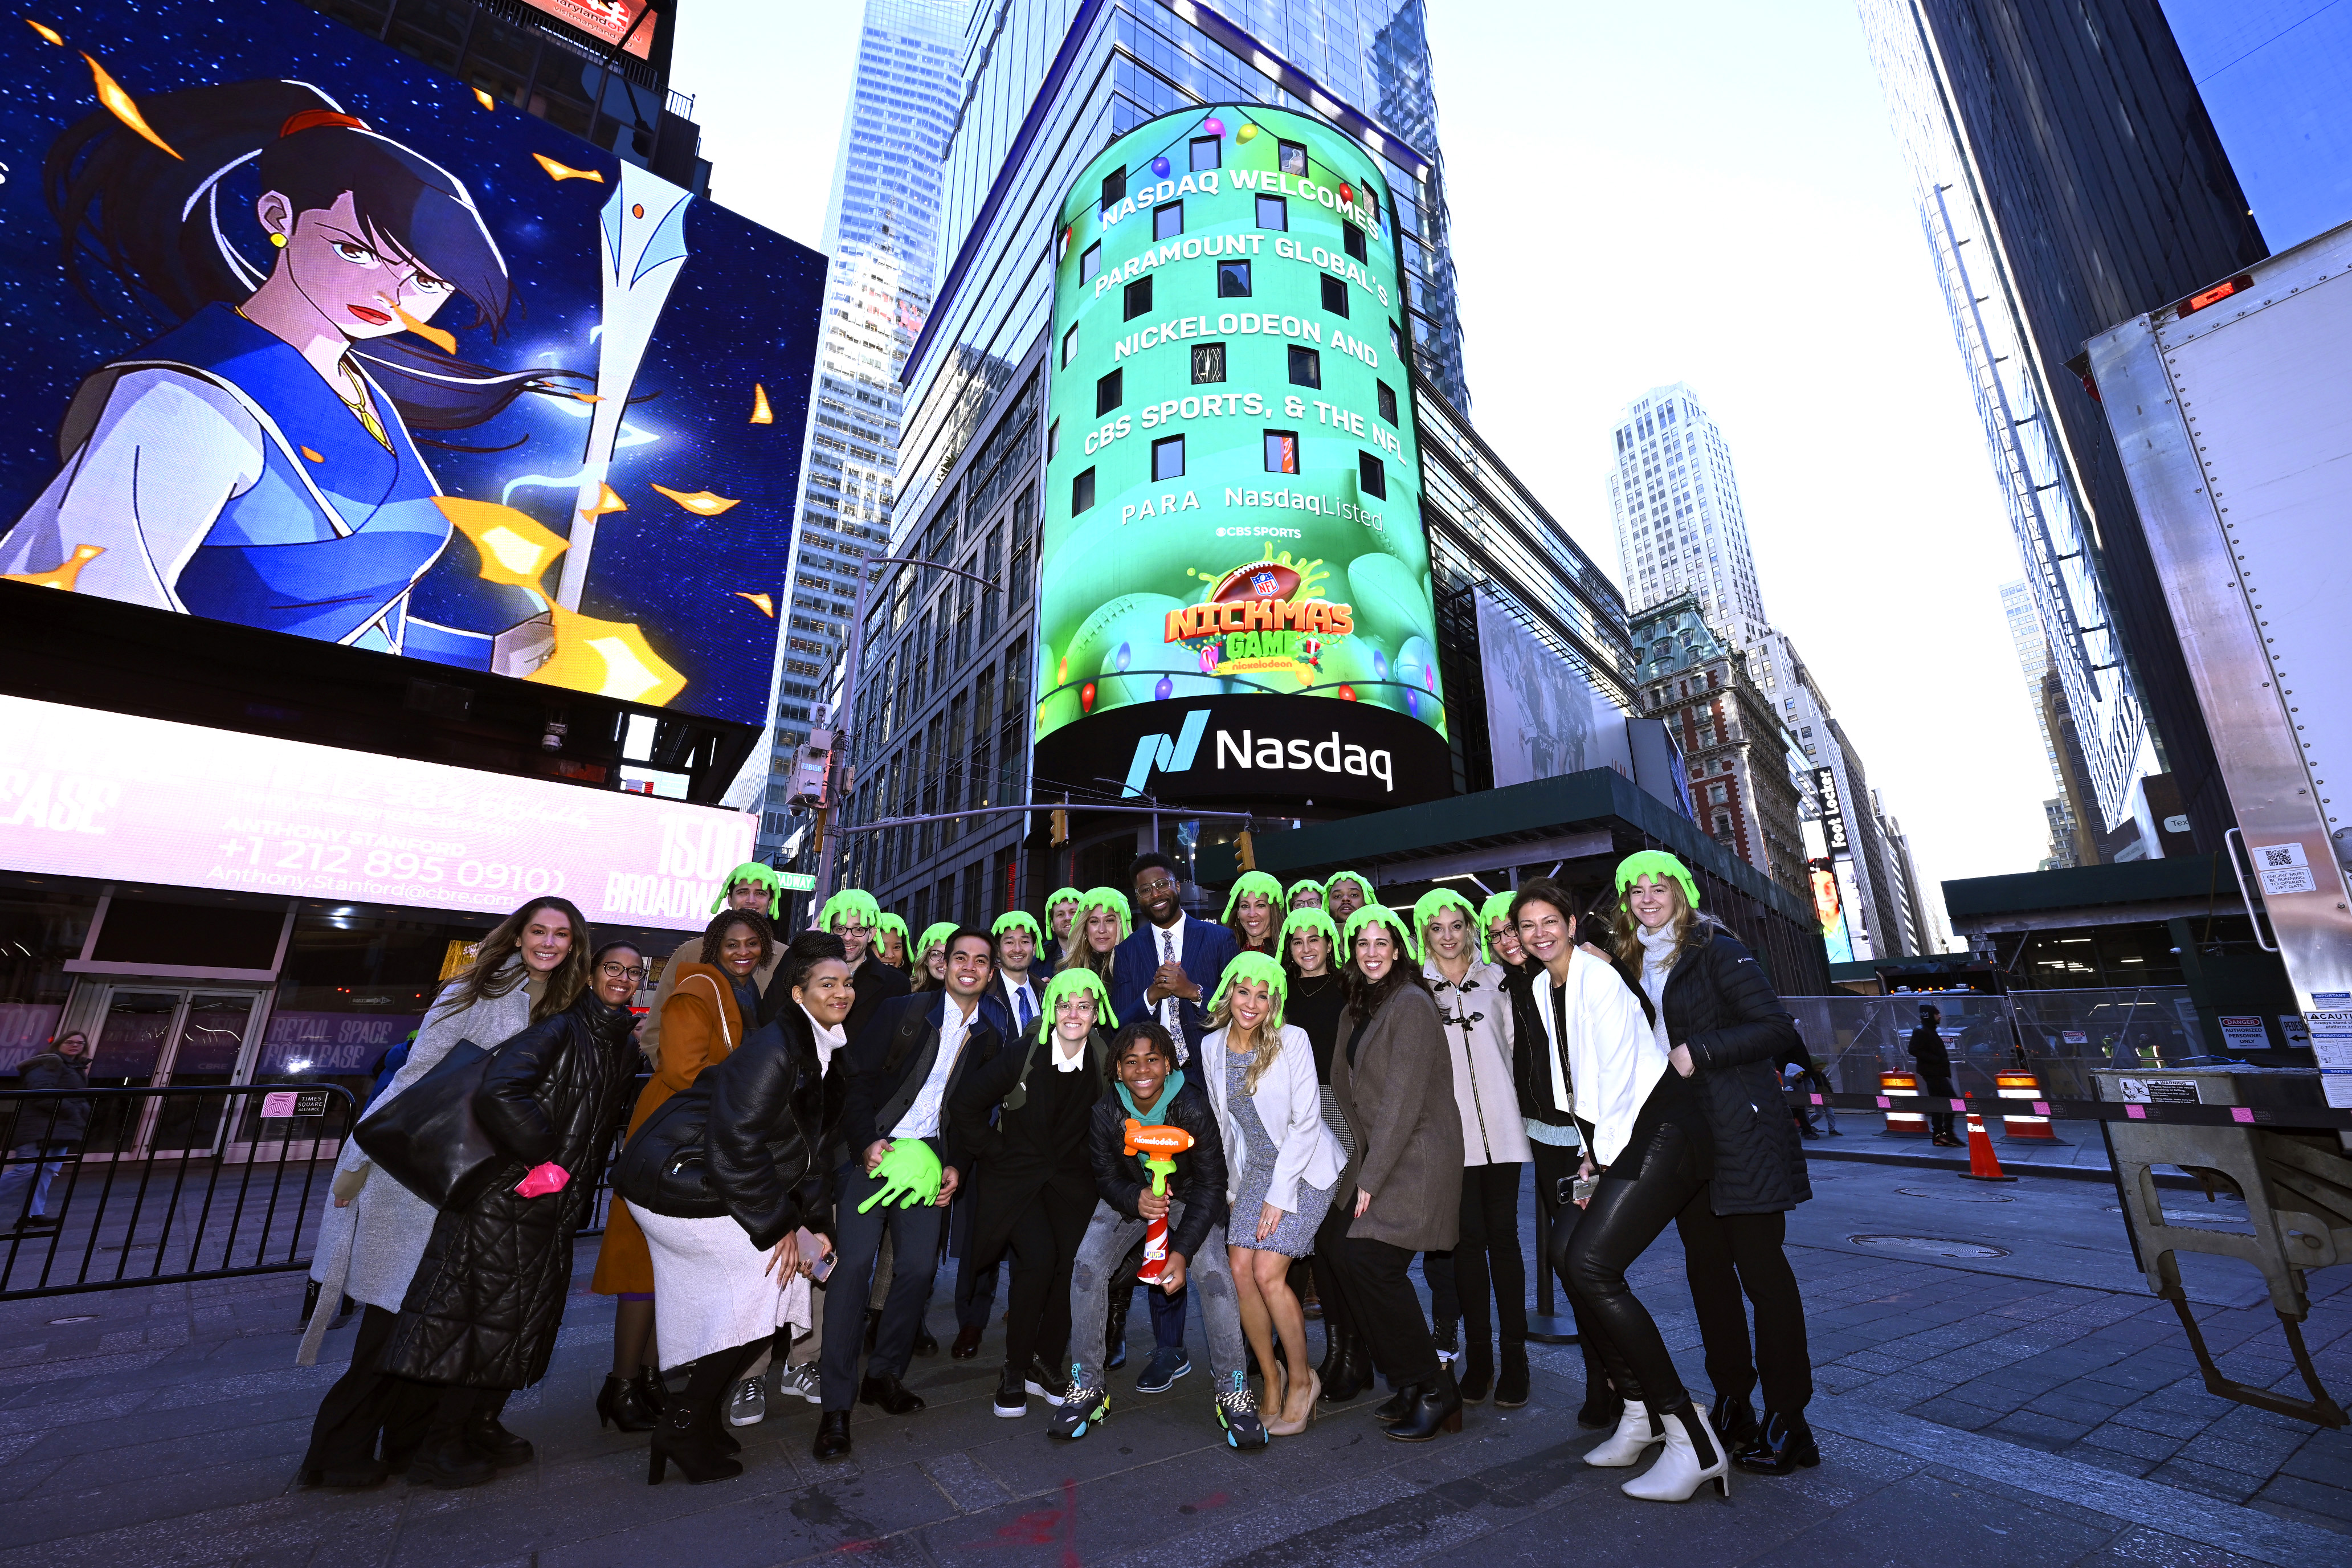 Nate Burleson And Young Dylan, With Nickelodeon, CBS Sports And The NFL Ring The Nasdaq Opening Bell In Celebration Of the Nickelodeon NFL Nickmas Game At NASDAQ MarketSite